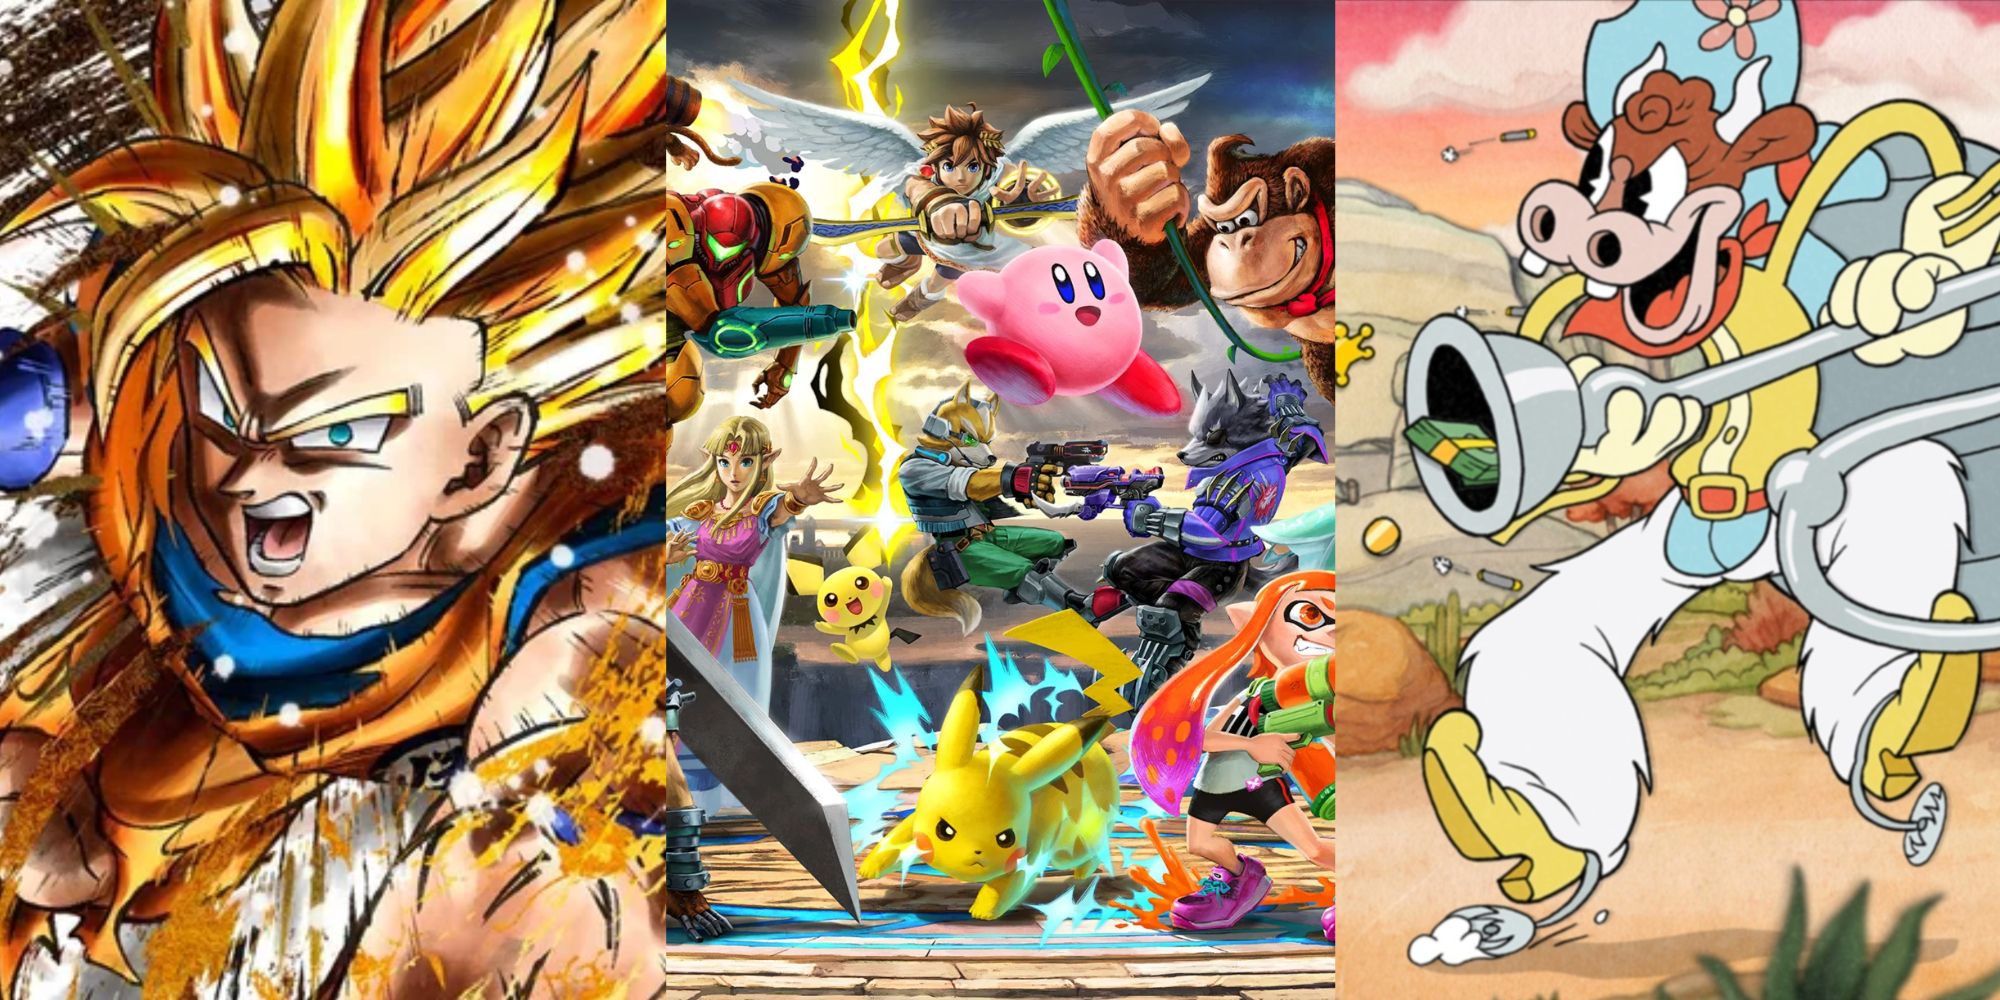 Dragonball FighterZ Goku, Super Smash bros cast, and a boss from Cuphead.